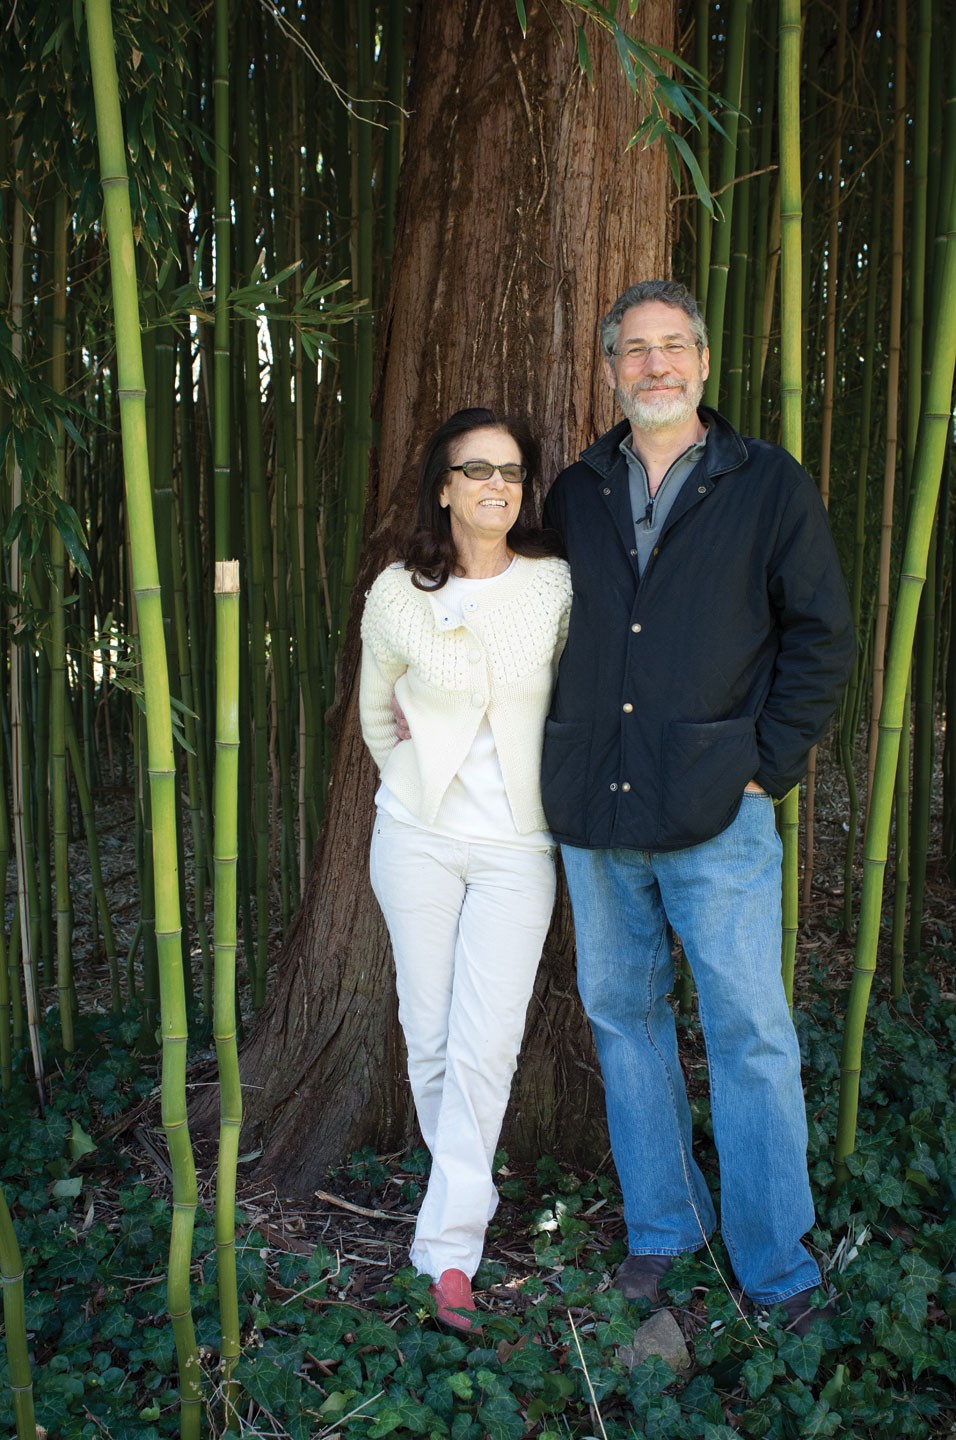 Diana and Jonathan Rose in the bamboo grove behind the main building at the Garrison Institute. - ROB PENNER